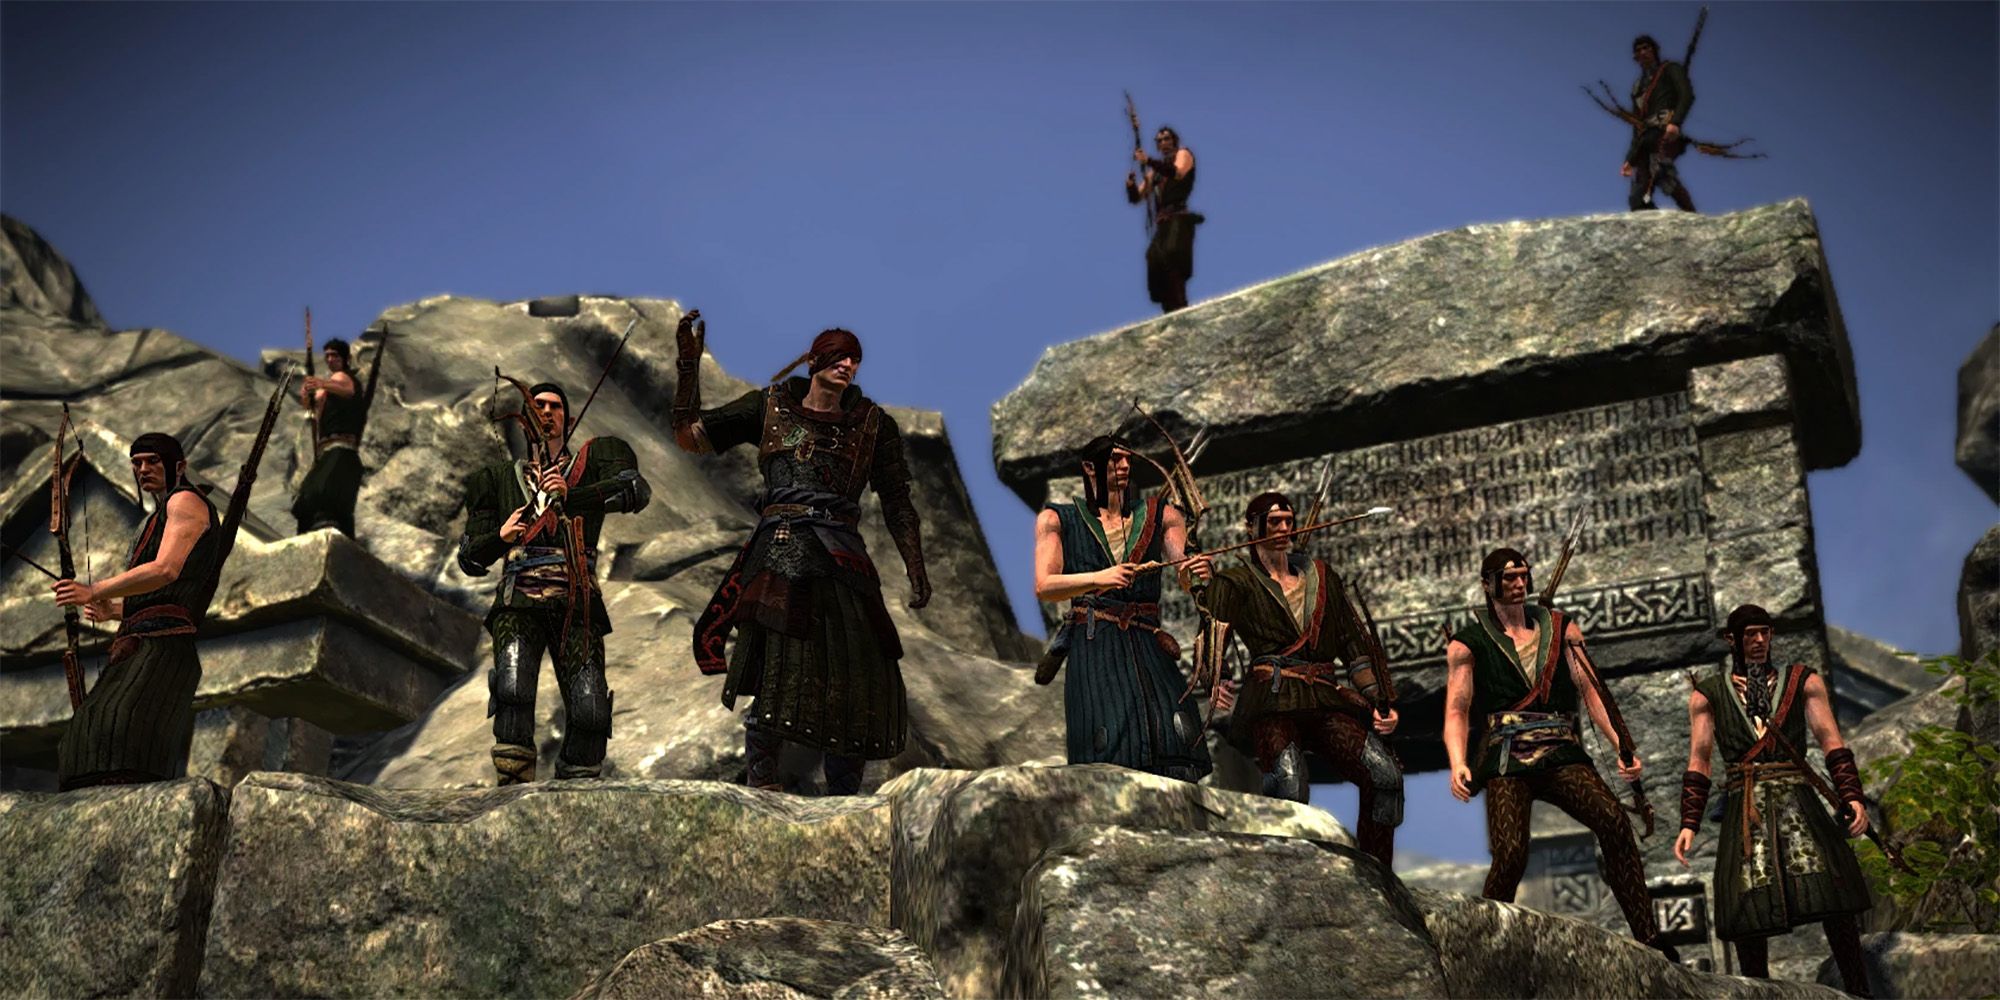 The Scoia'tael standing in a row on a rock fortification in The Witcher 2